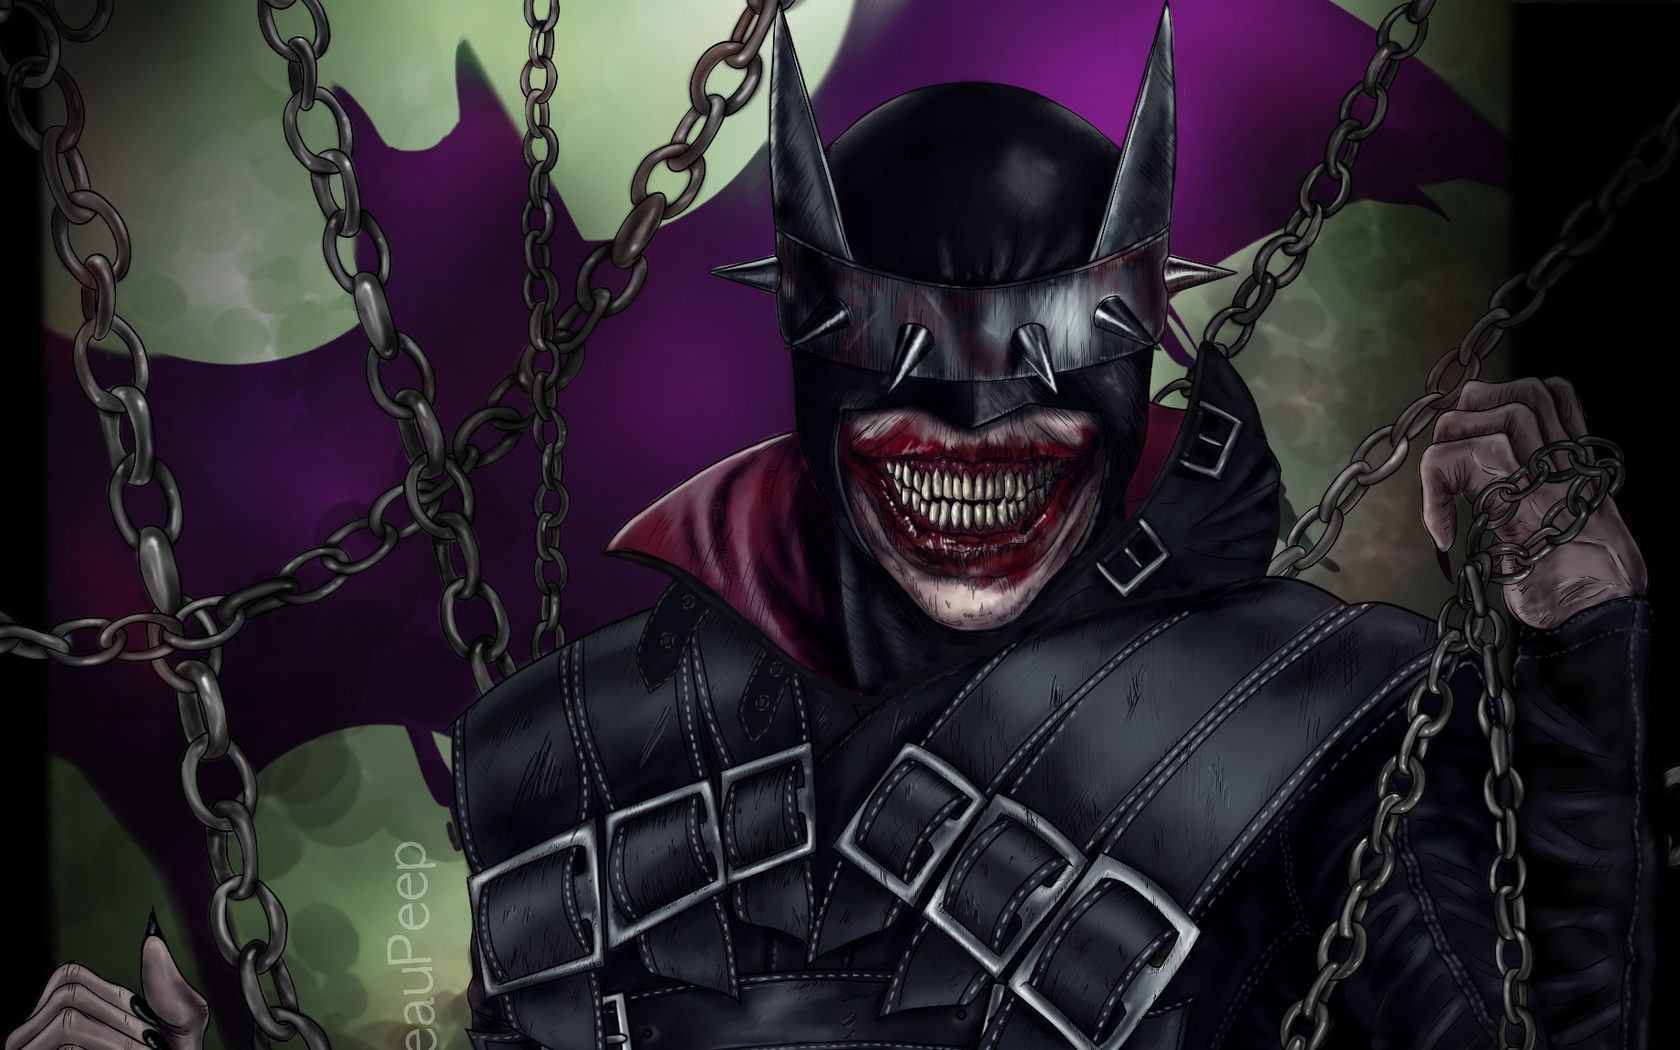 The Batman Who Laughs Wallpapers